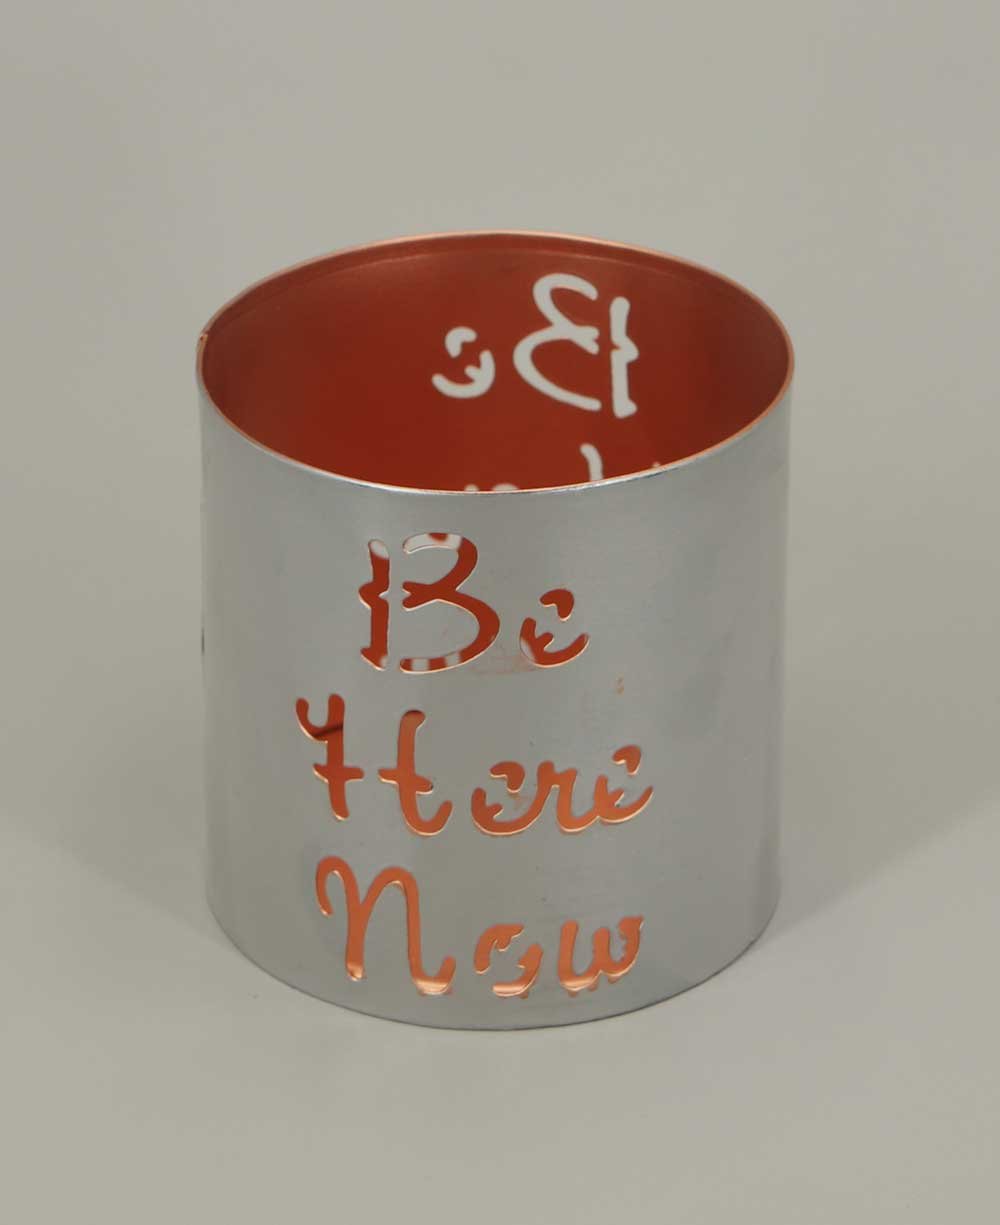 Fairtrade Inspirational Be Here Now Candle / Pen Holder - Candle Holders